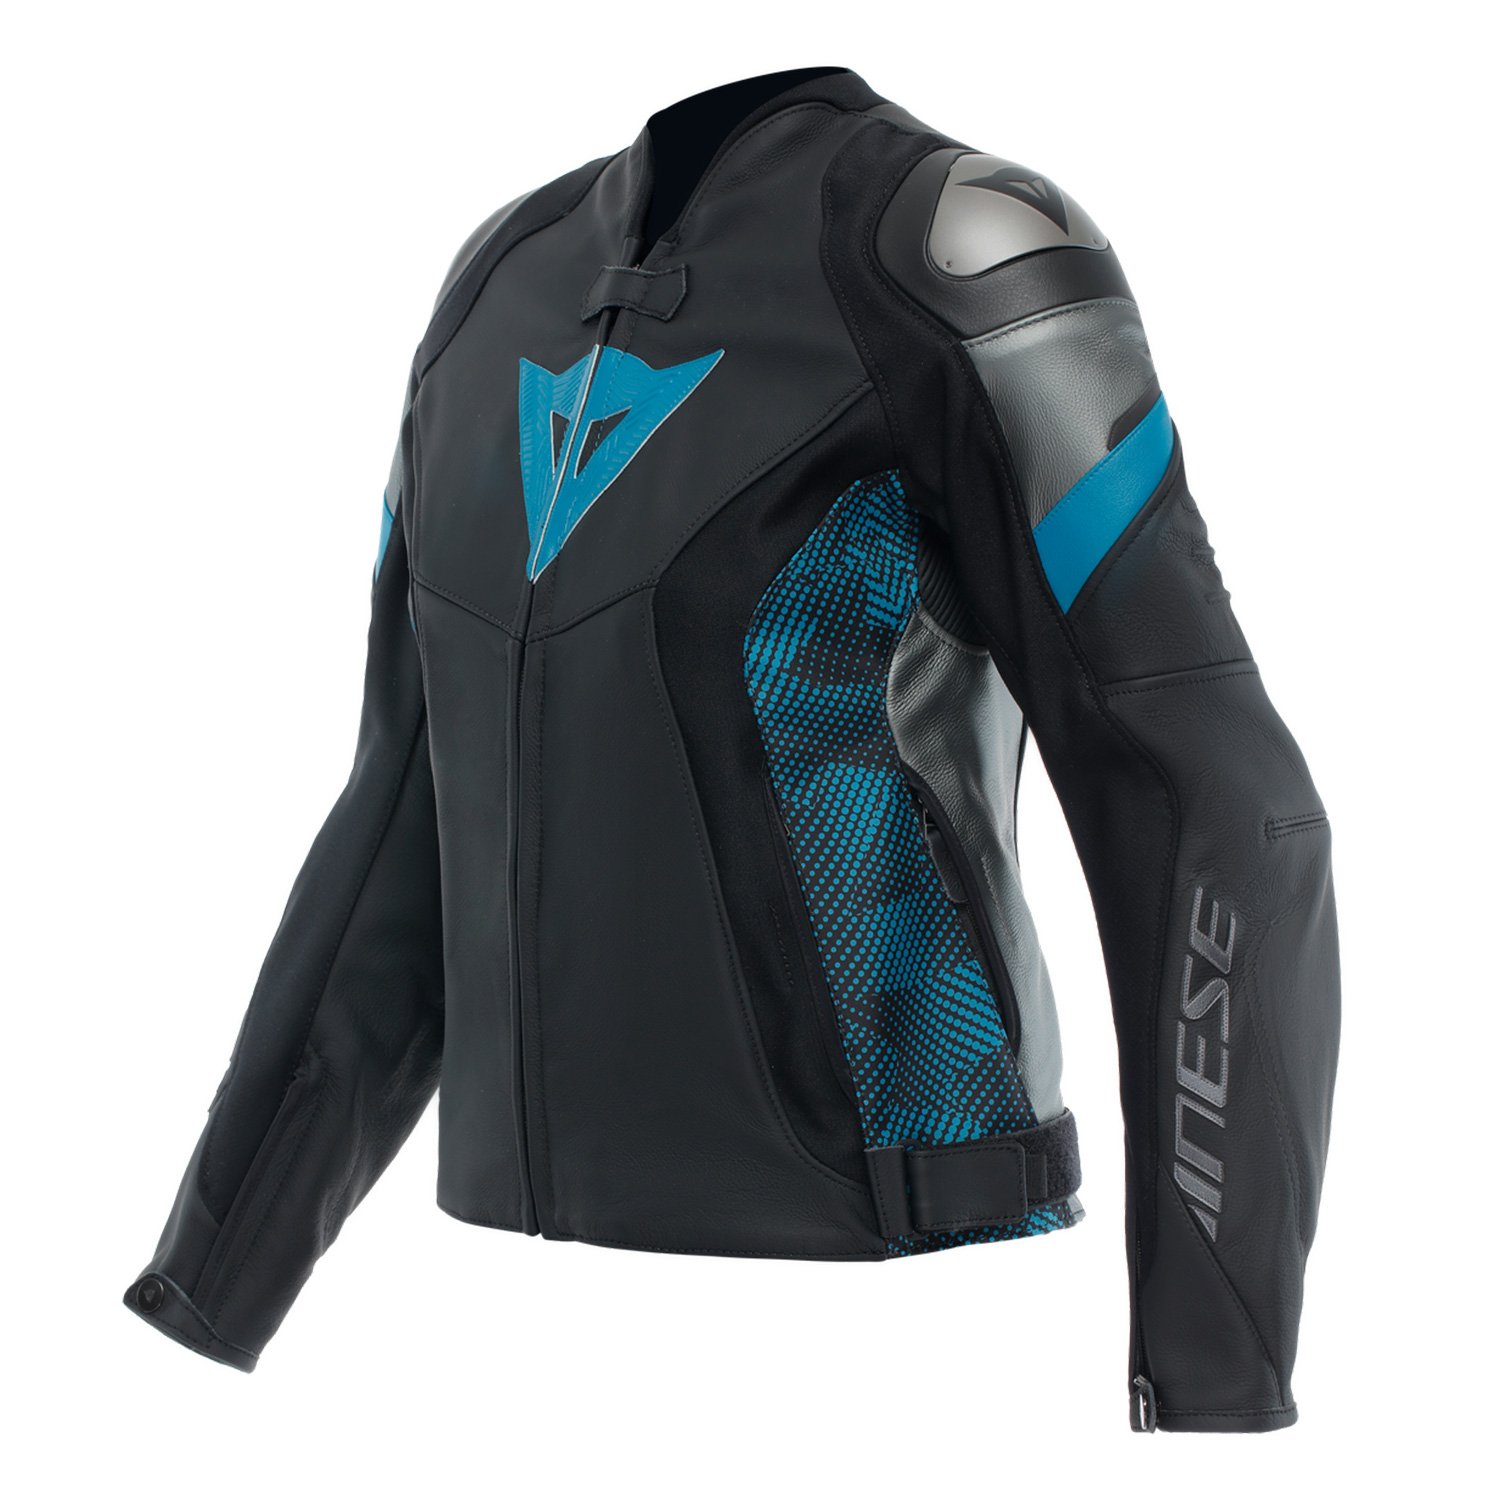 Image of Dainese Avro 5 Leather Jacket WMN Black Teal Anthracite Size 40 ID 8051019639837